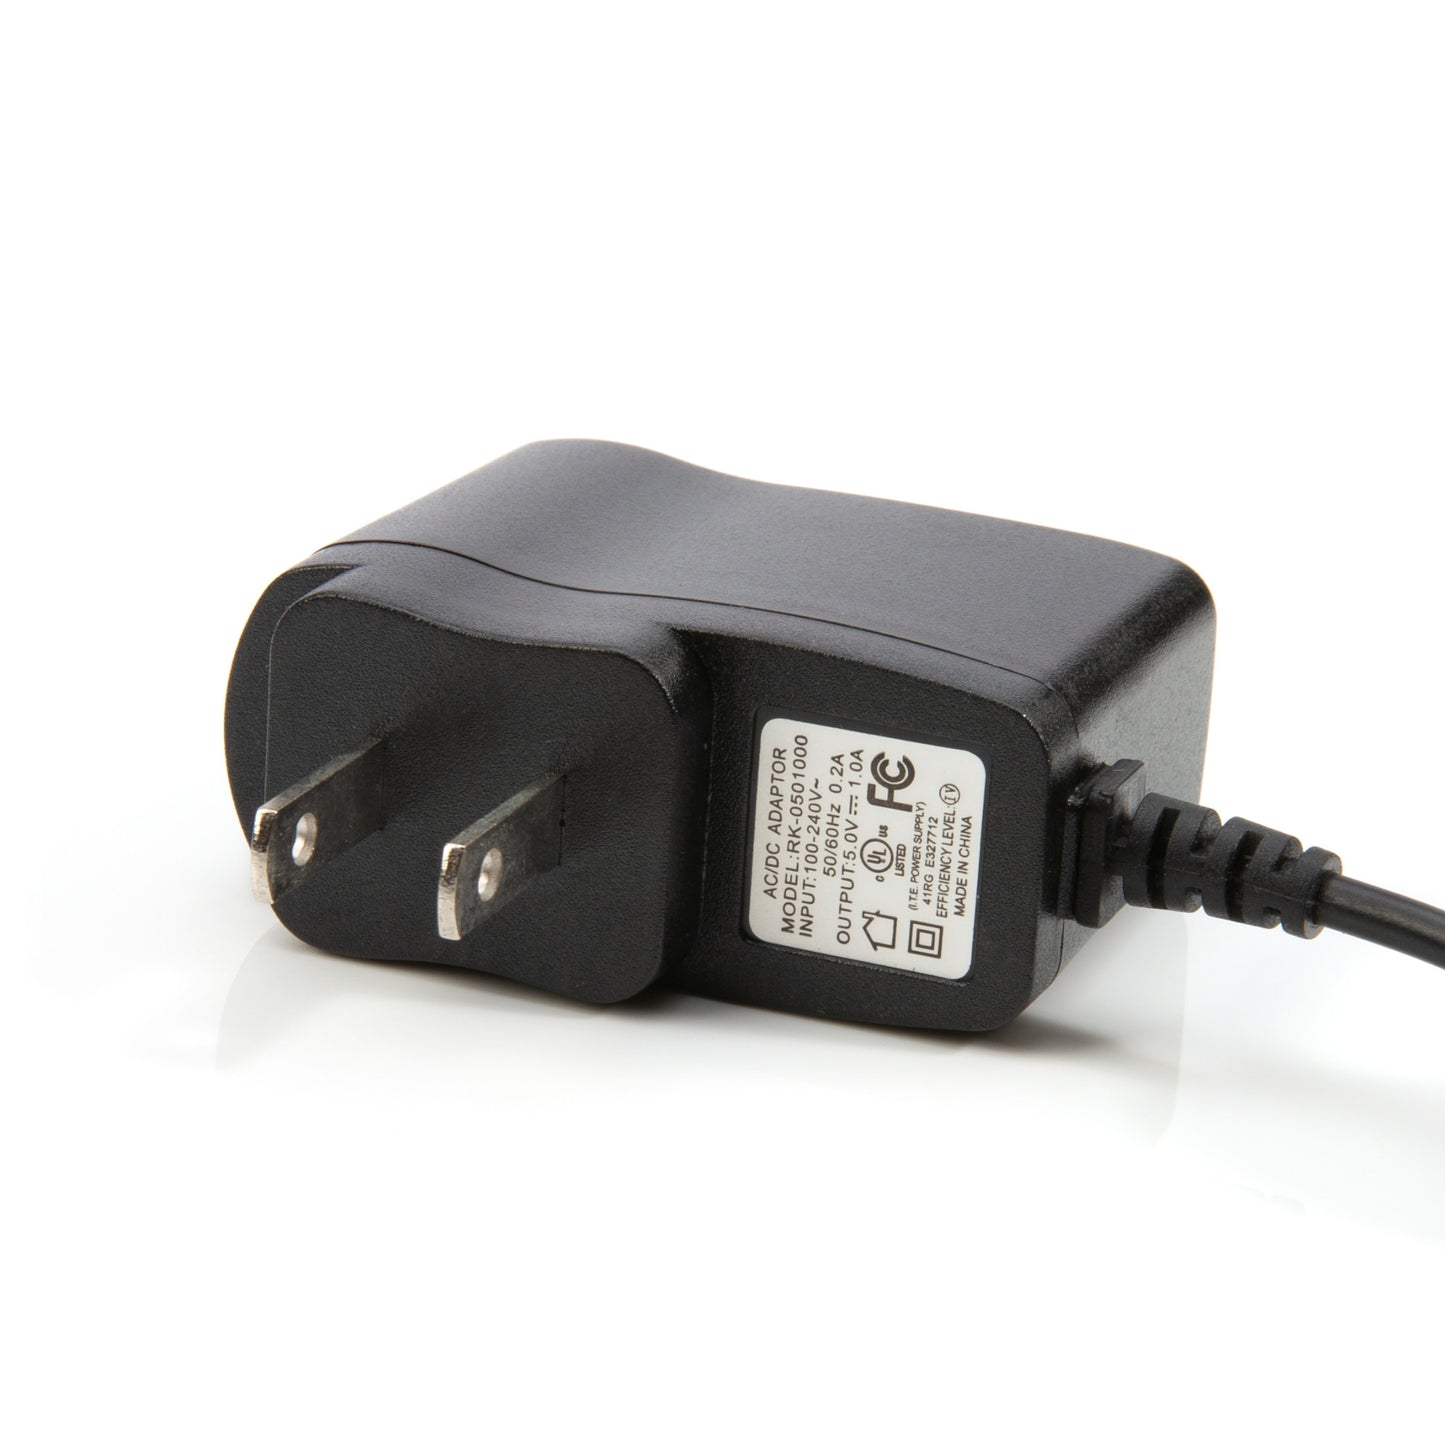 120V AC Wall Charger for Rechargeable Flashlights